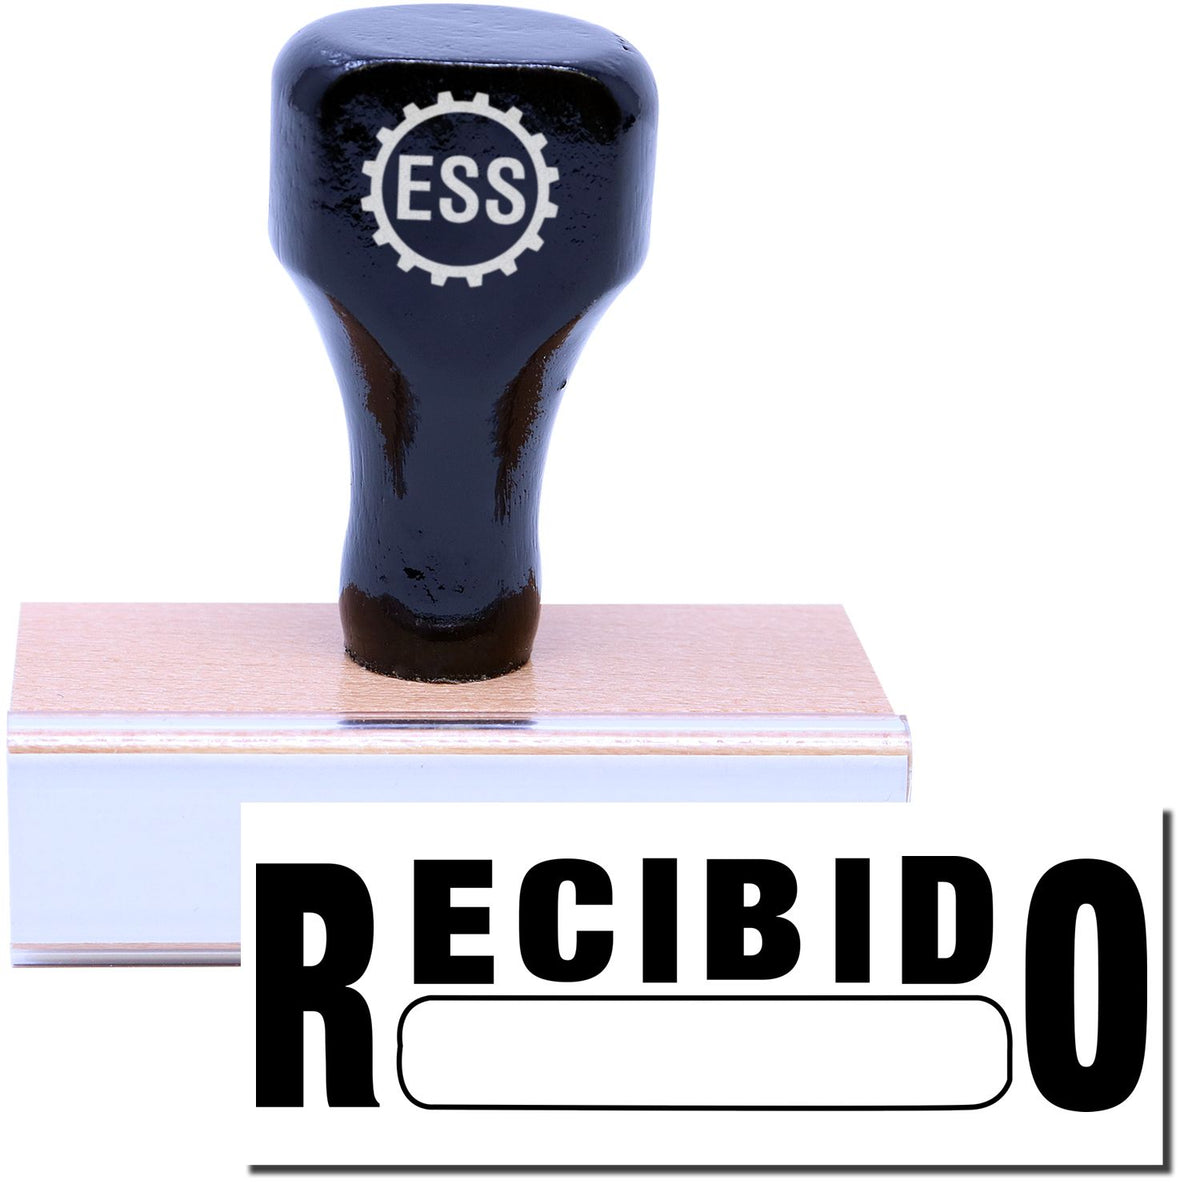 A stock office rubber stamp with a stamped image showing how the text &quot;RECIBIDO&quot; in a large font with a box is displayed after stamping.